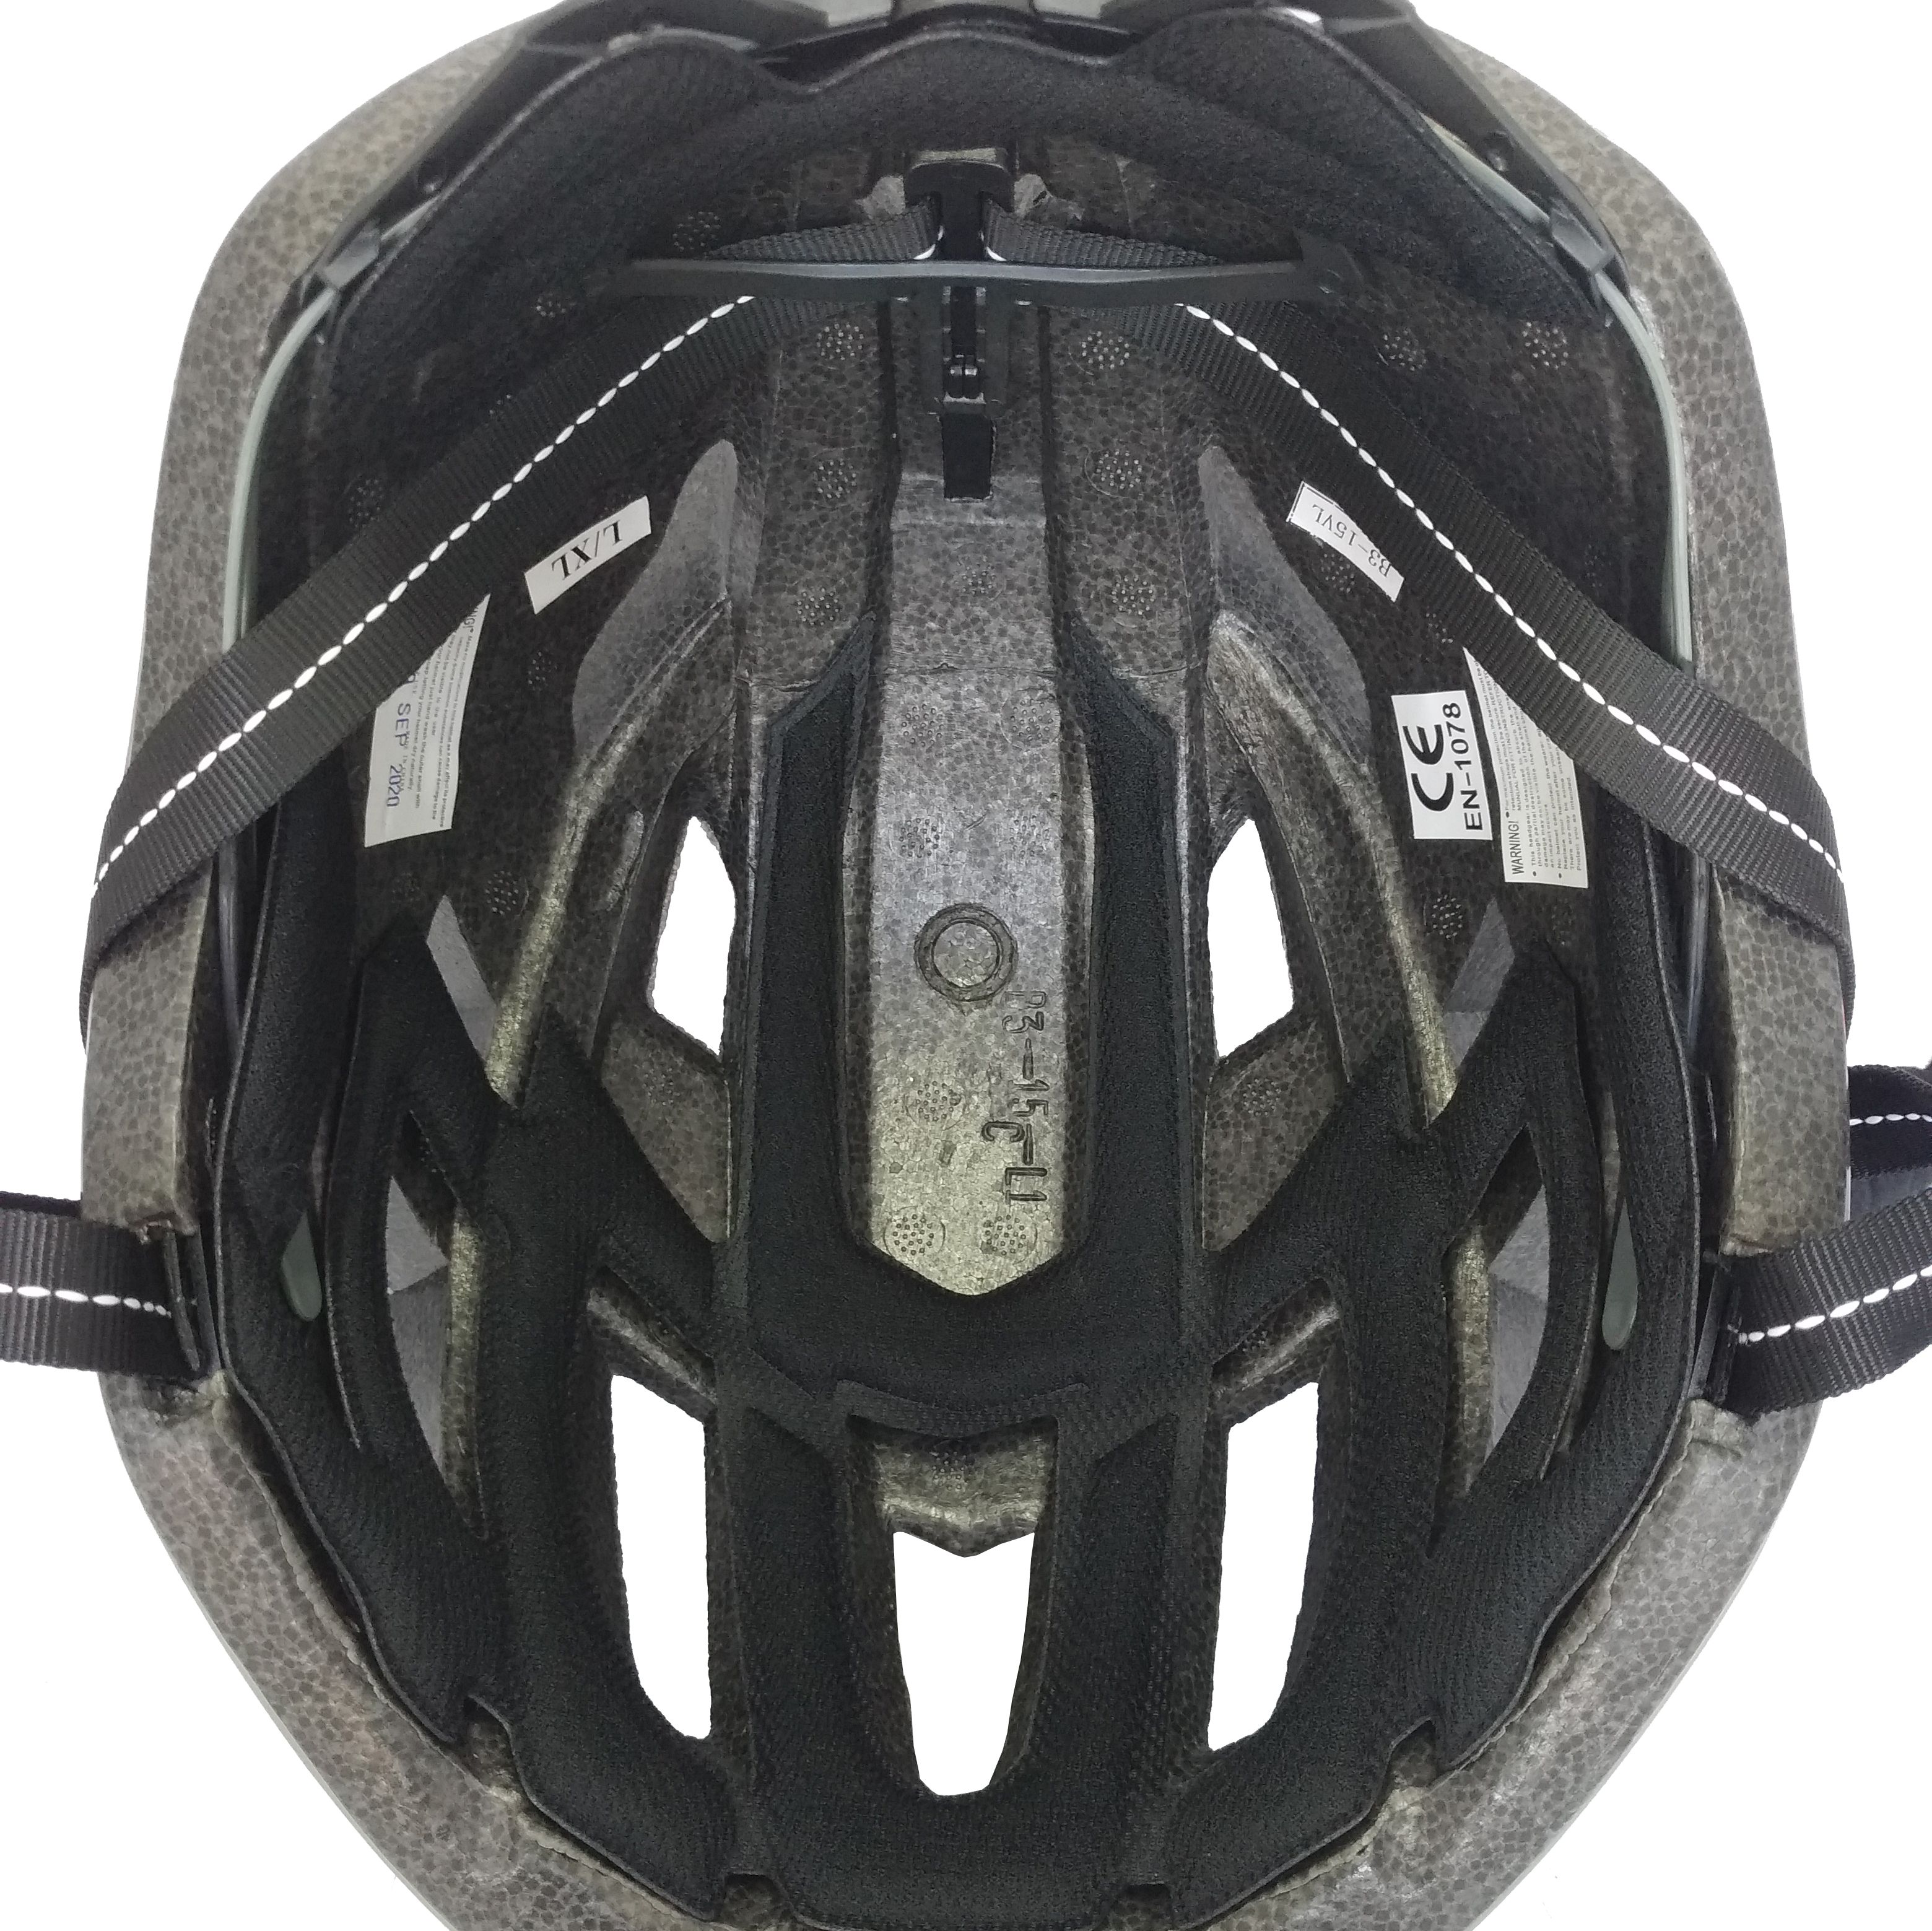 B3-15VL Bicycle Helmet with rear LED warning light